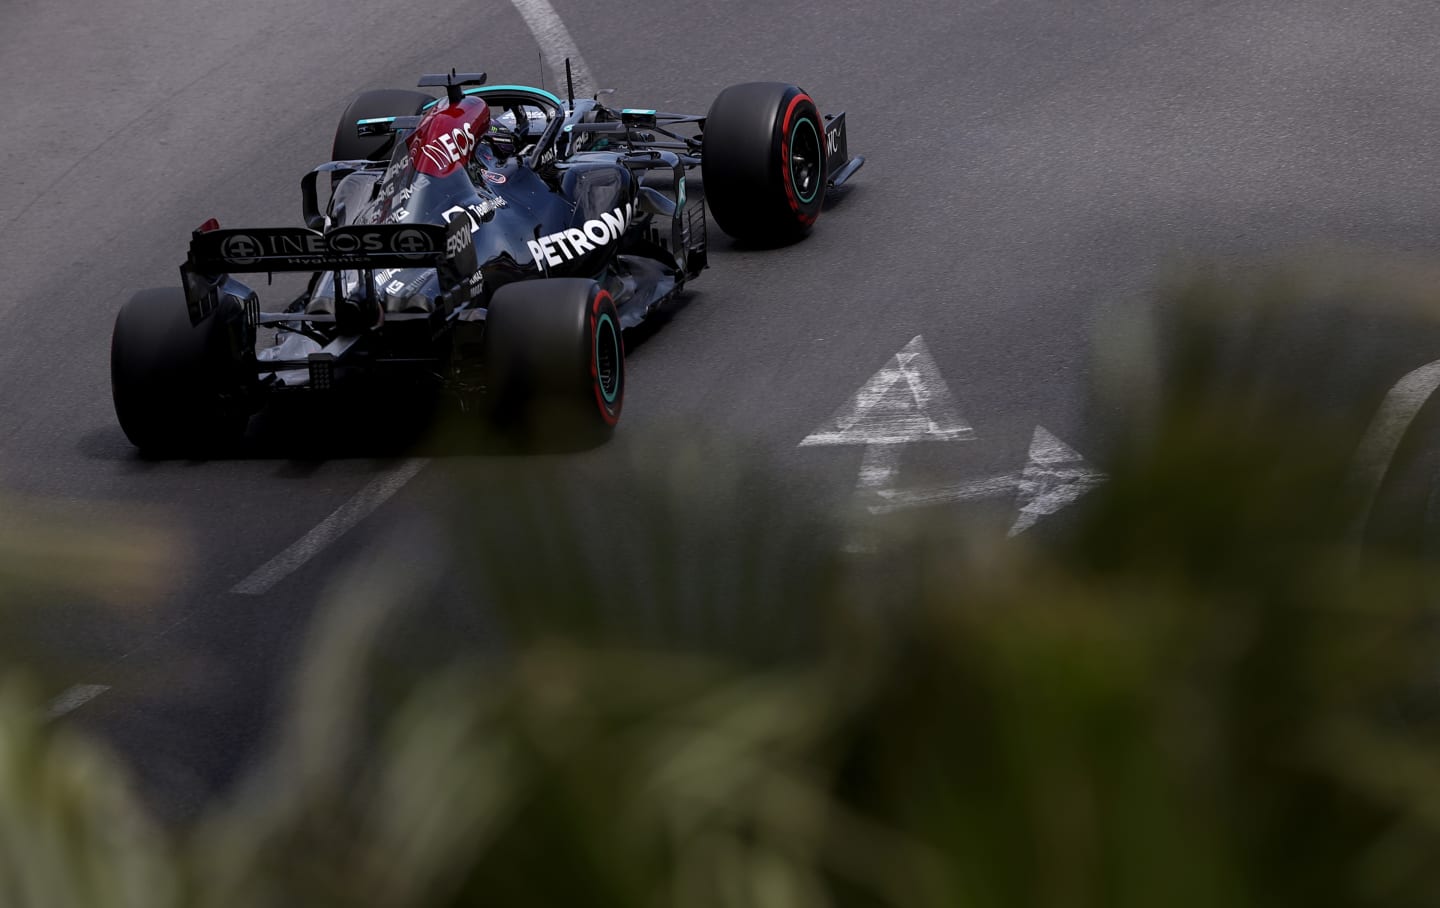 MONTE-CARLO, MONACO - MAY 23: Lewis Hamilton of Great Britain driving the (44) Mercedes AMG Petronas F1 Team Mercedes W12 on track during the F1 Grand Prix of Monaco at Circuit de Monaco on May 23, 2021 in Monte-Carlo, Monaco. (Photo by Lars Baron/Getty Images)